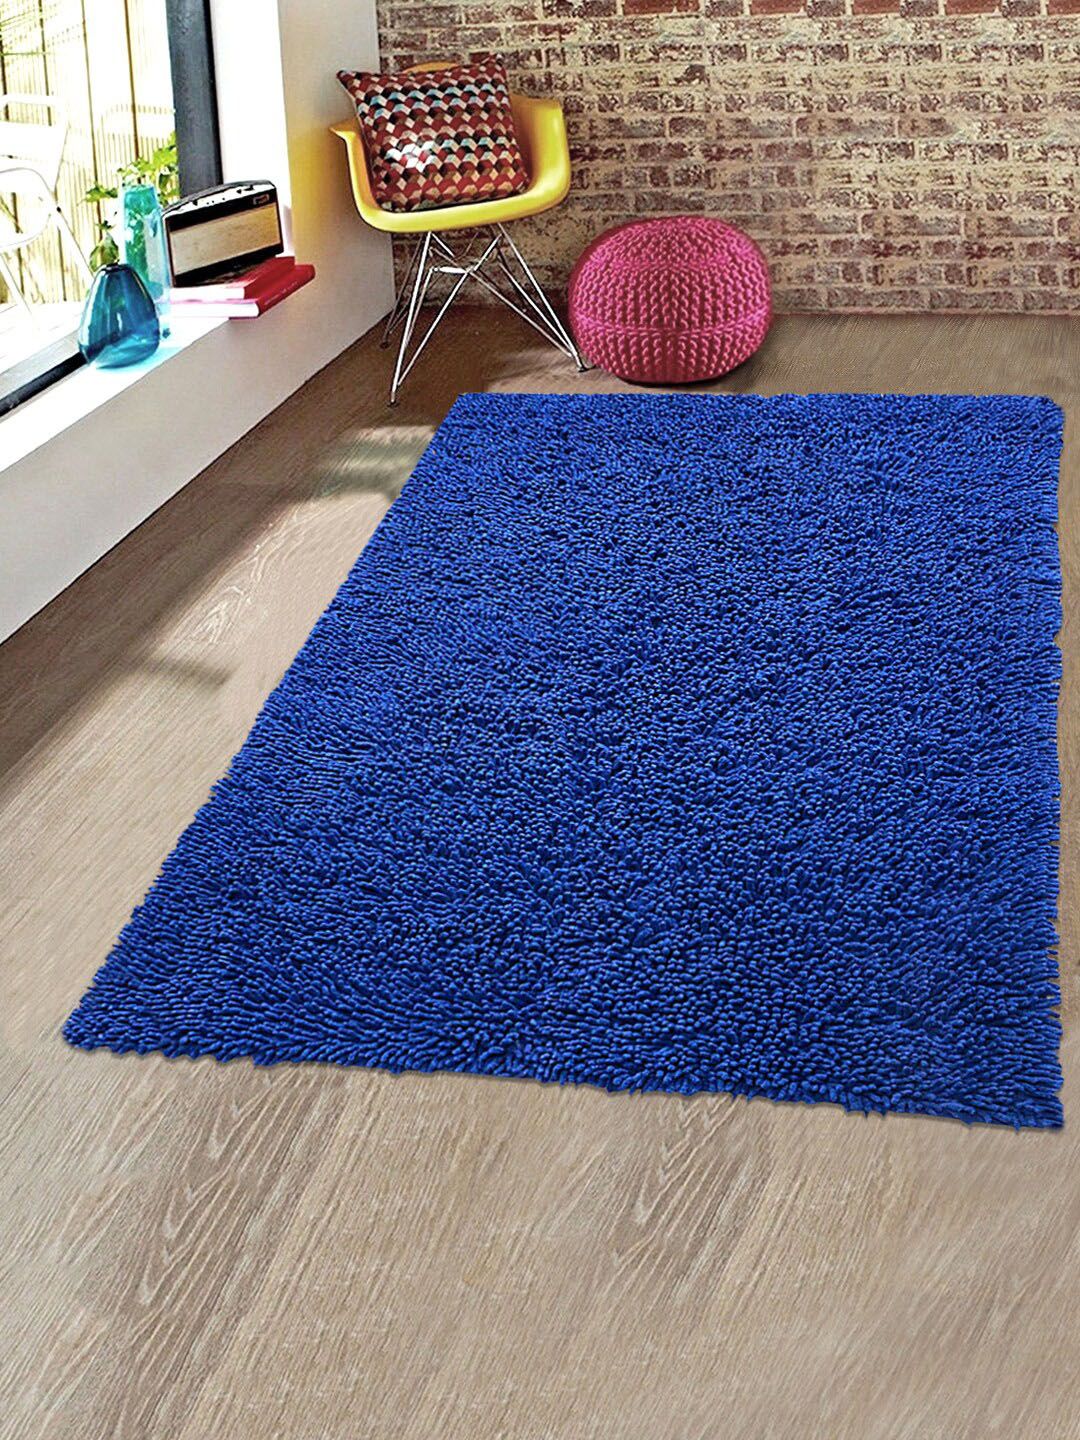 Saral Home Blue Solid Shaggy Anti-Skid Carpet Price in India